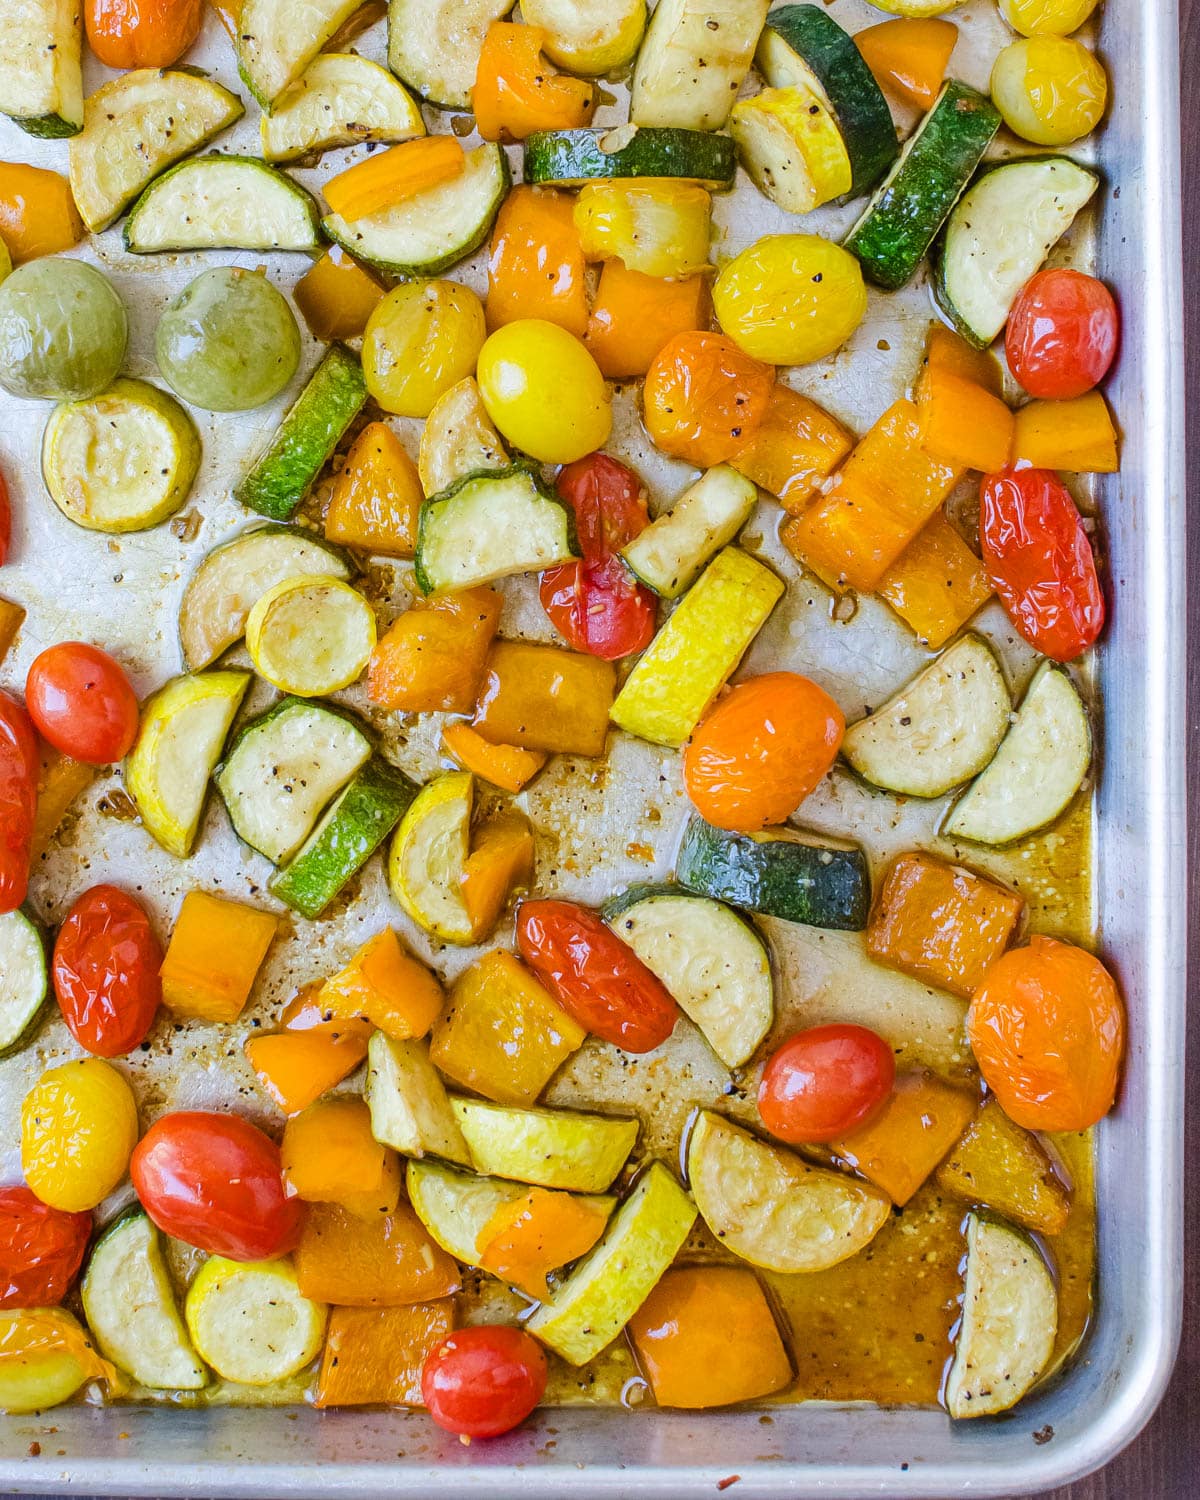 The roasted vegetables hot from the oven.